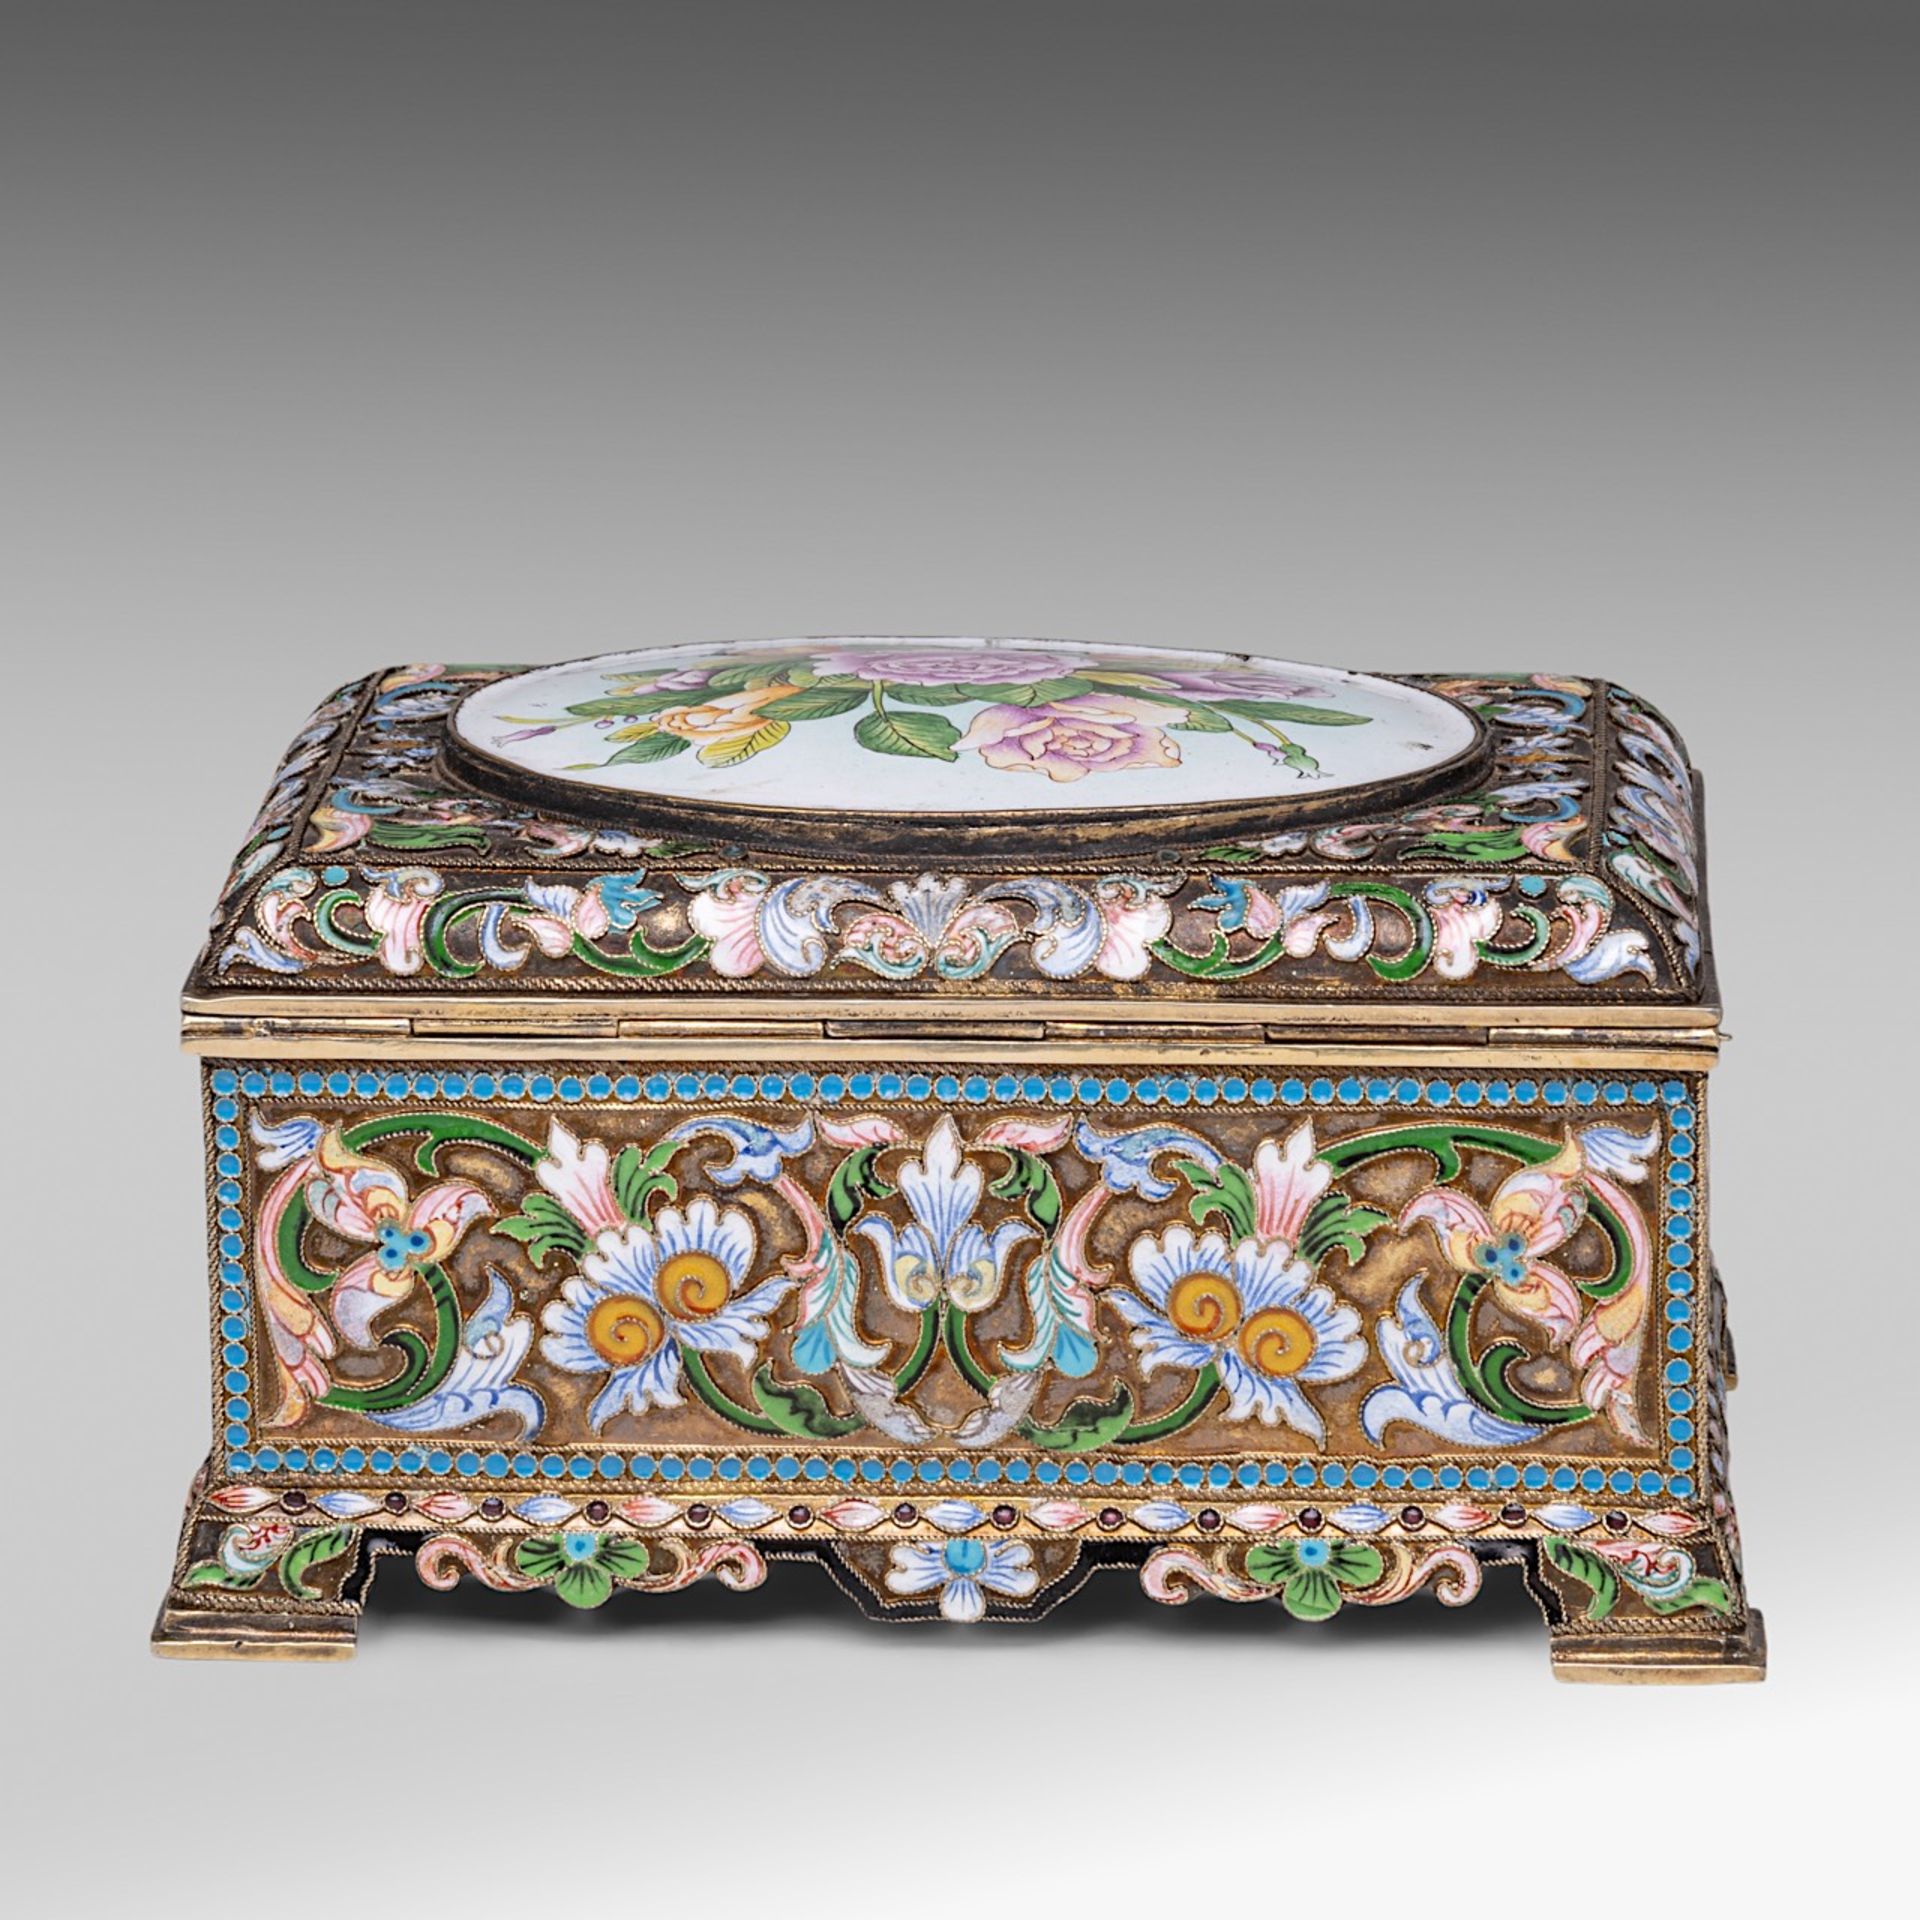 A Russian silver and enamel floral decorated jewellery box, hallmarked 84 Zolotniki, H 8 - 15 - 10 c - Image 4 of 9